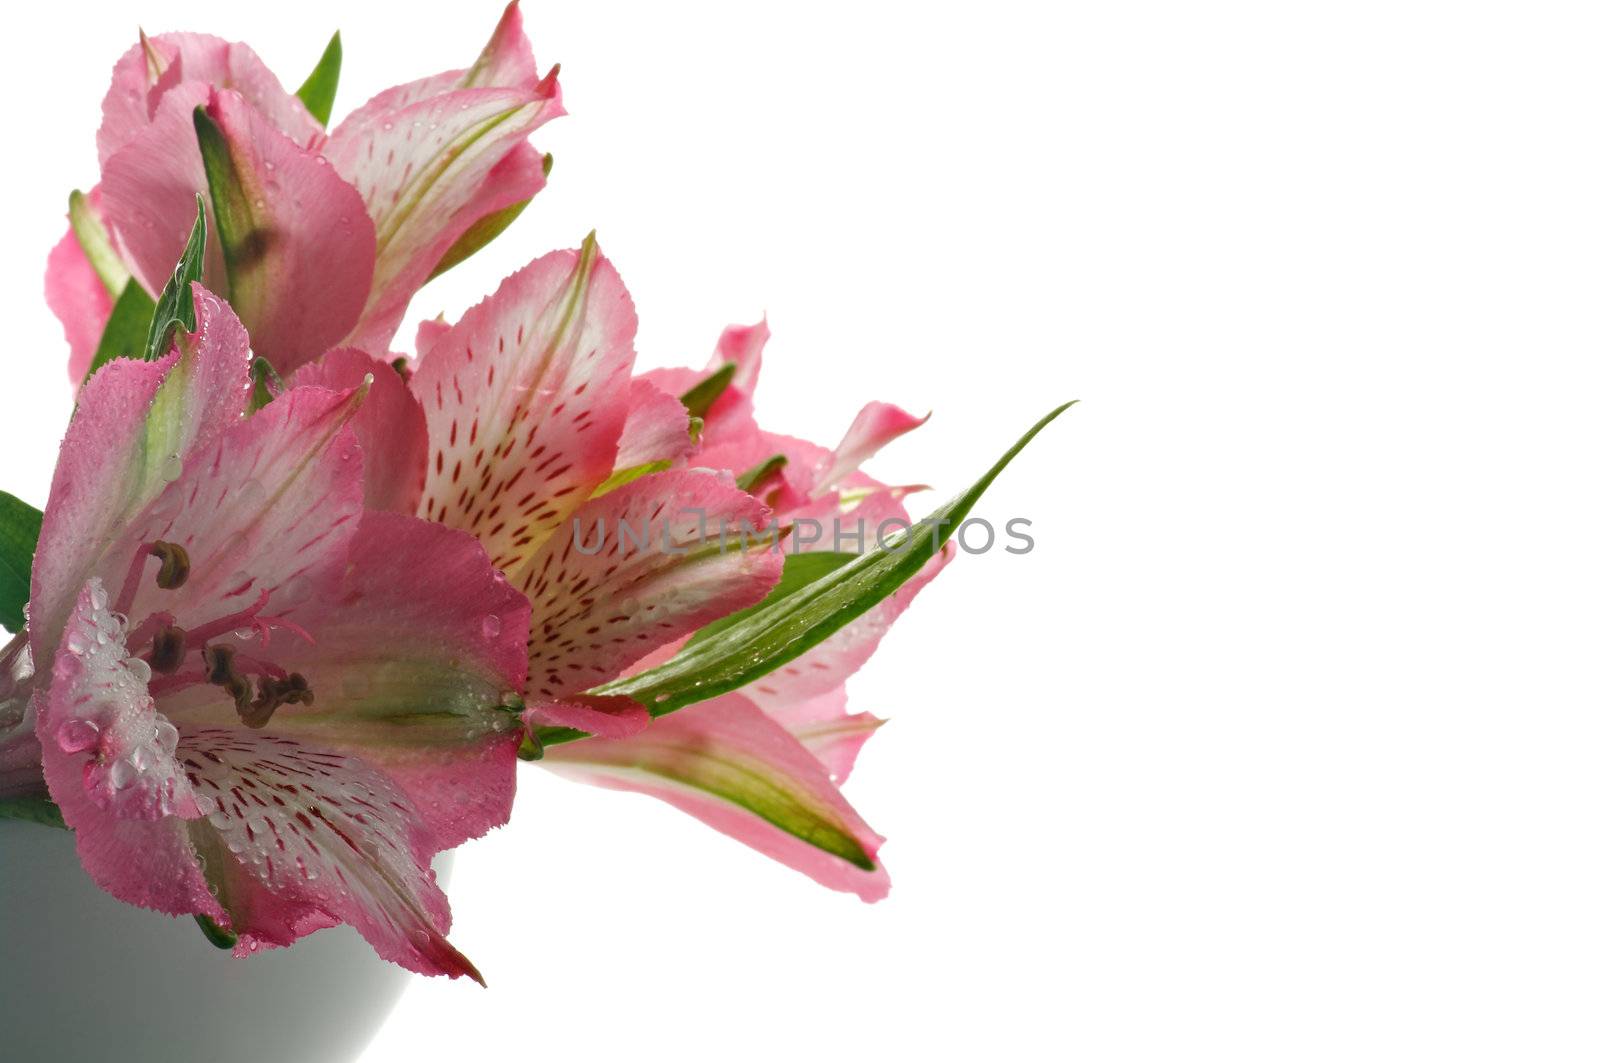 Bunch of Beautiful Pink Alstroemeria with Droplets in White Vase isolated on white background